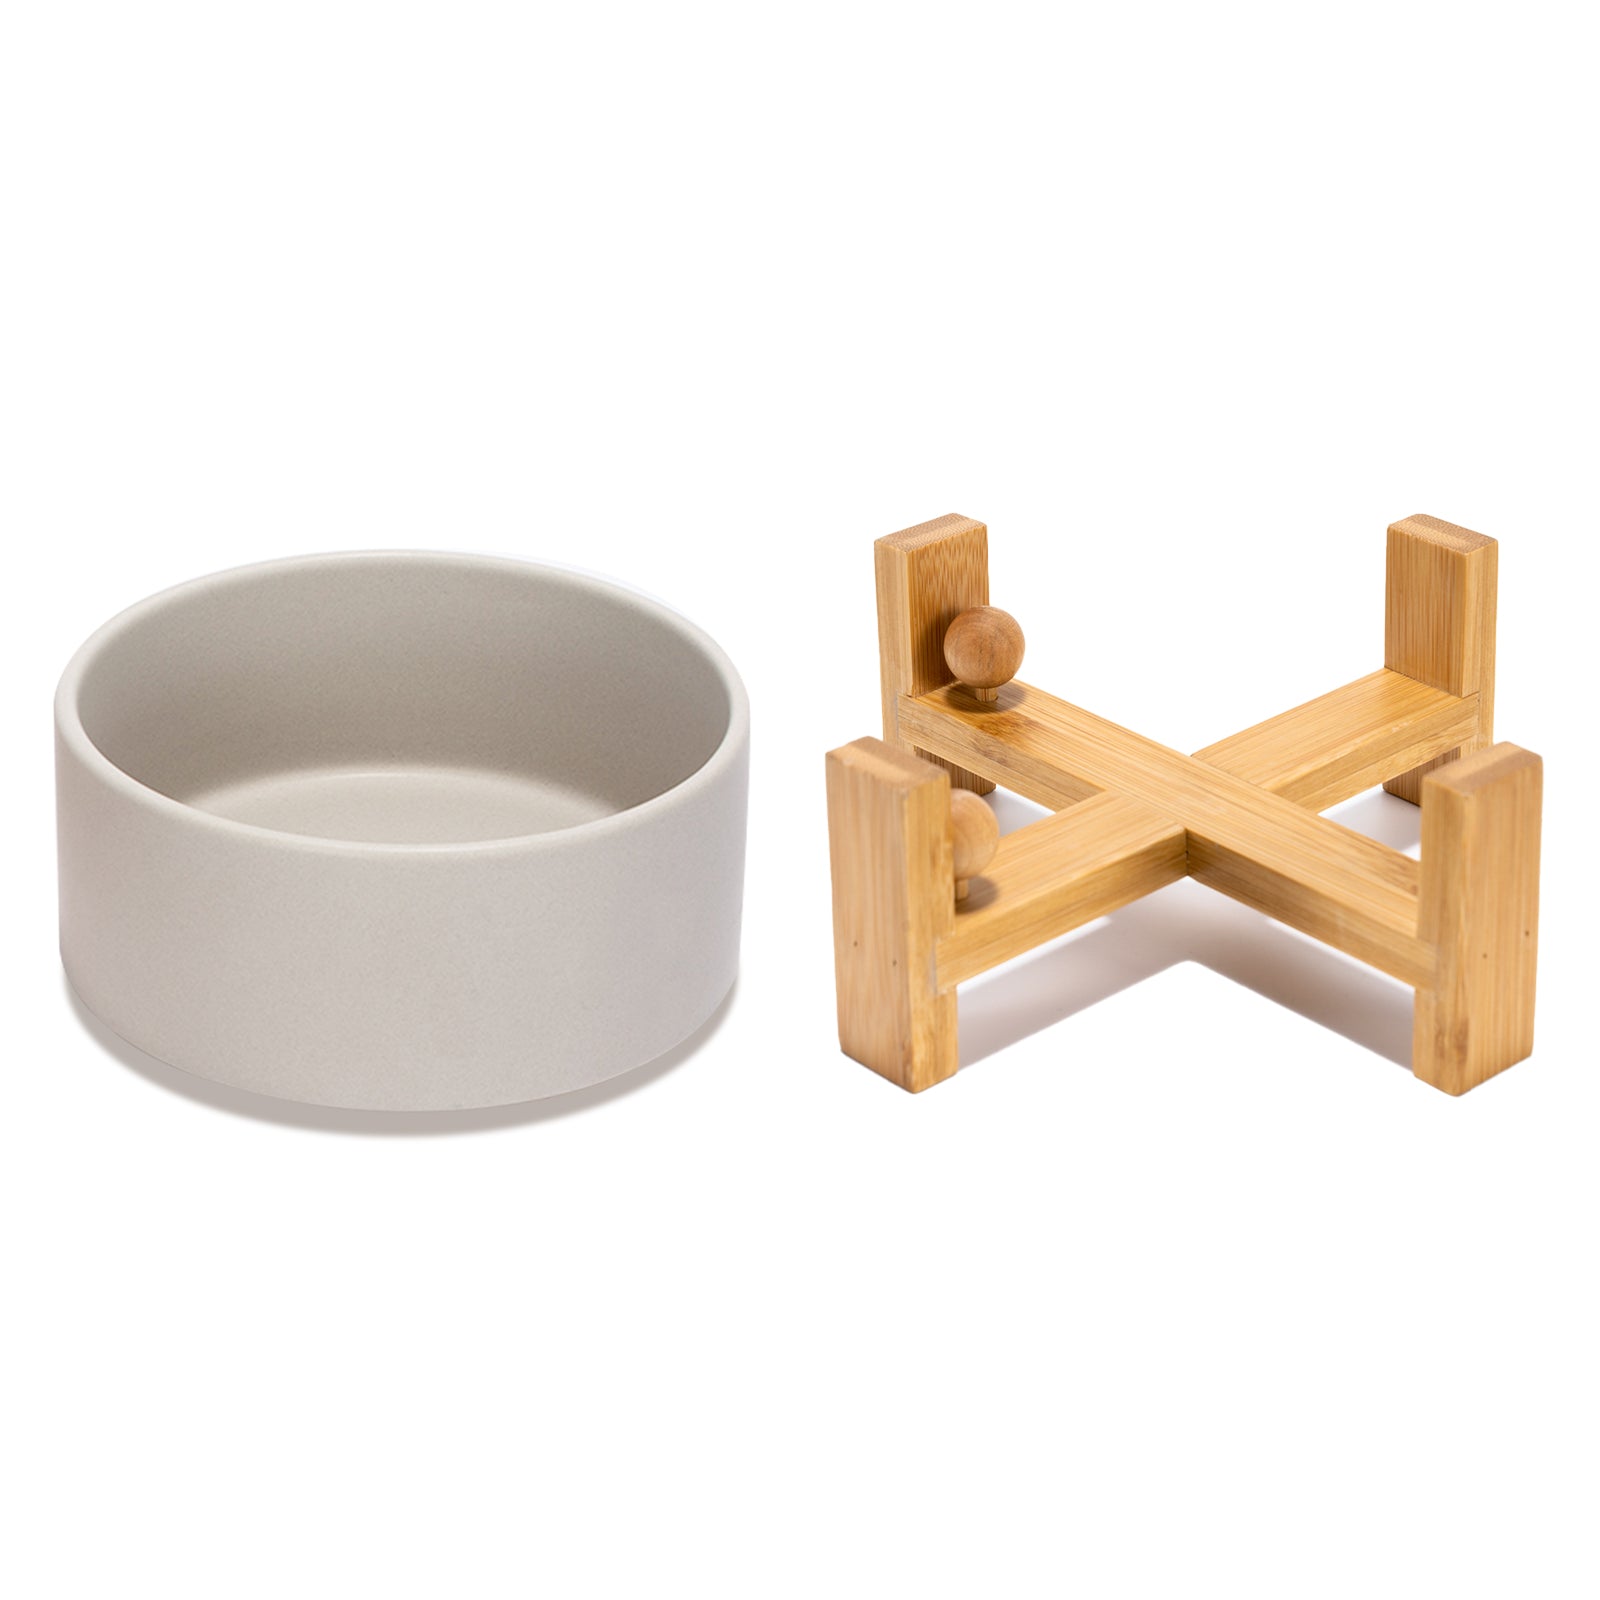 a grey 15° tilted dog bowl set that is displayed separately